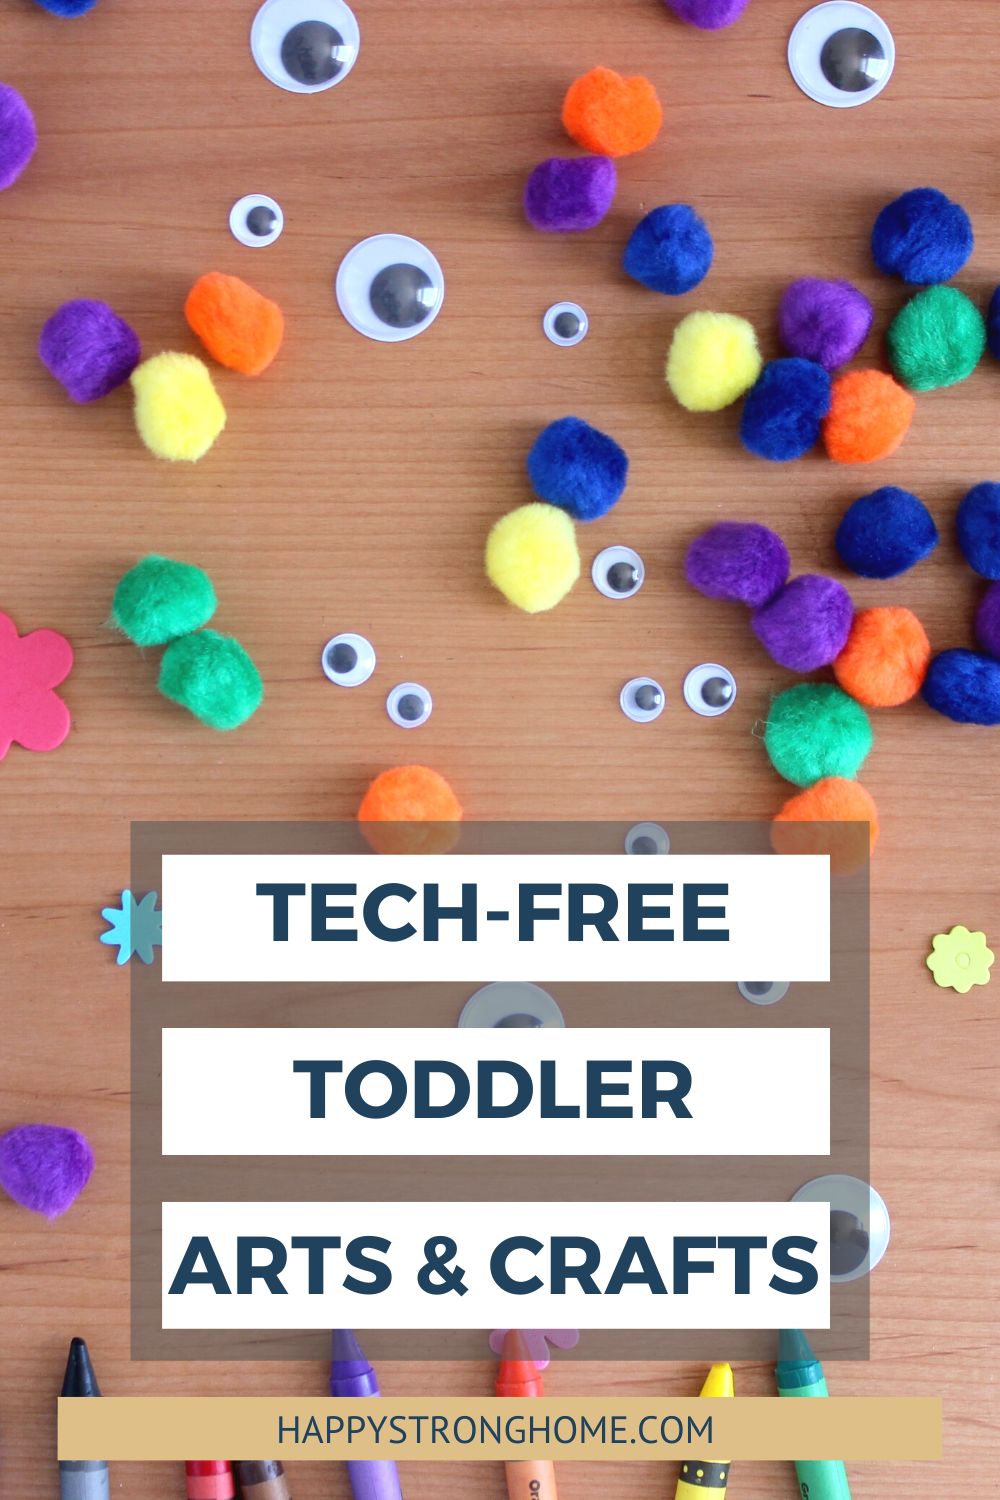 https://happystronghome.com/wp-content/uploads/2023/04/Tech-Free-Toddler-Arts-Crafts-Pin1.jpg